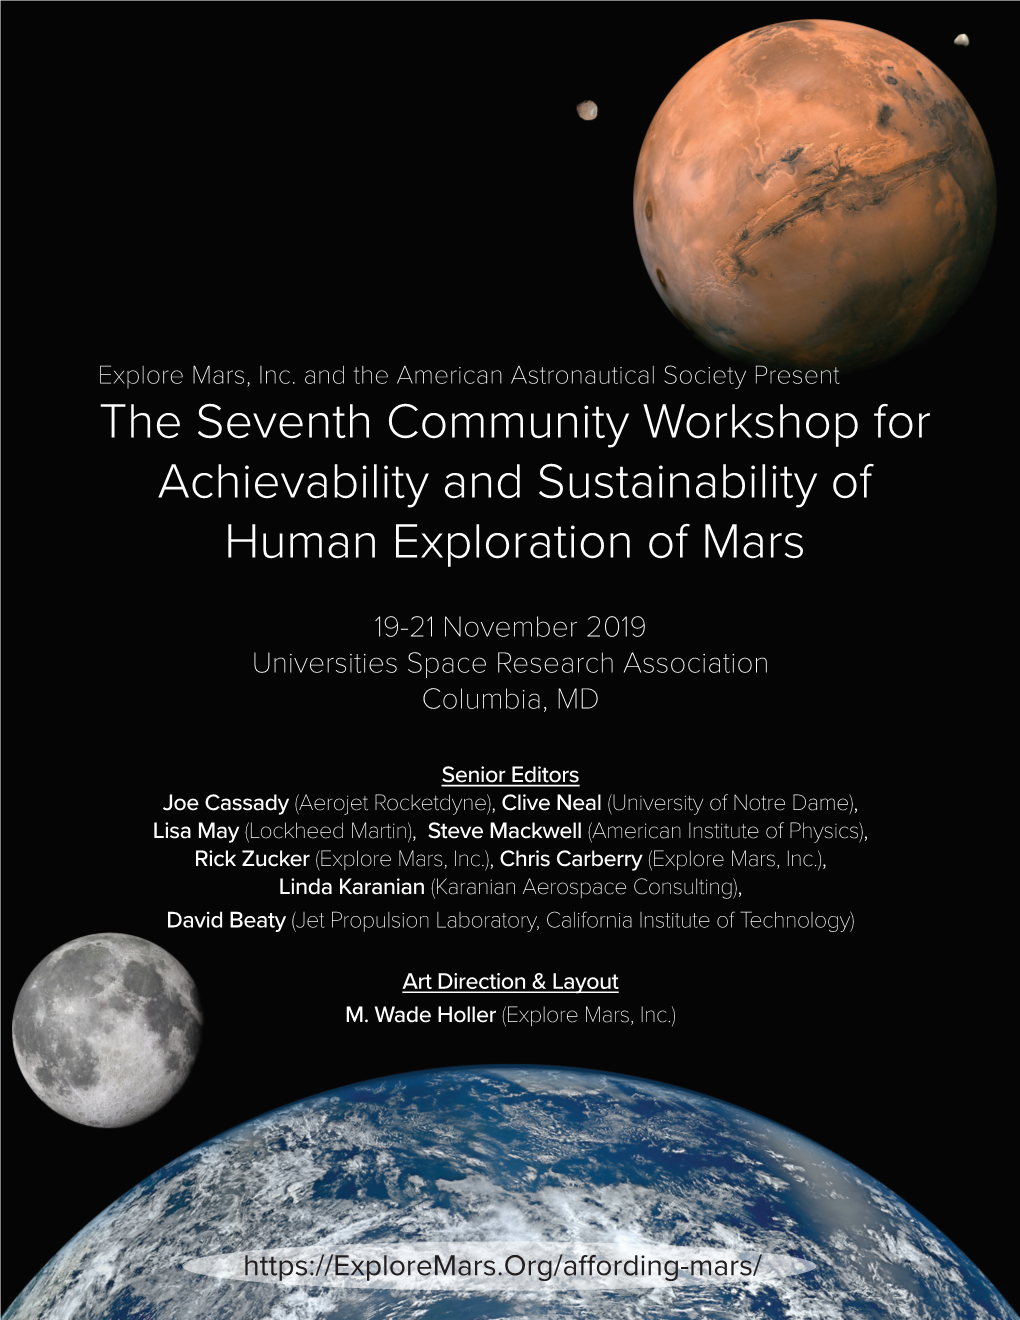 The Seventh Community Workshop for Achievability and Sustainability of Human Exploration of Mars